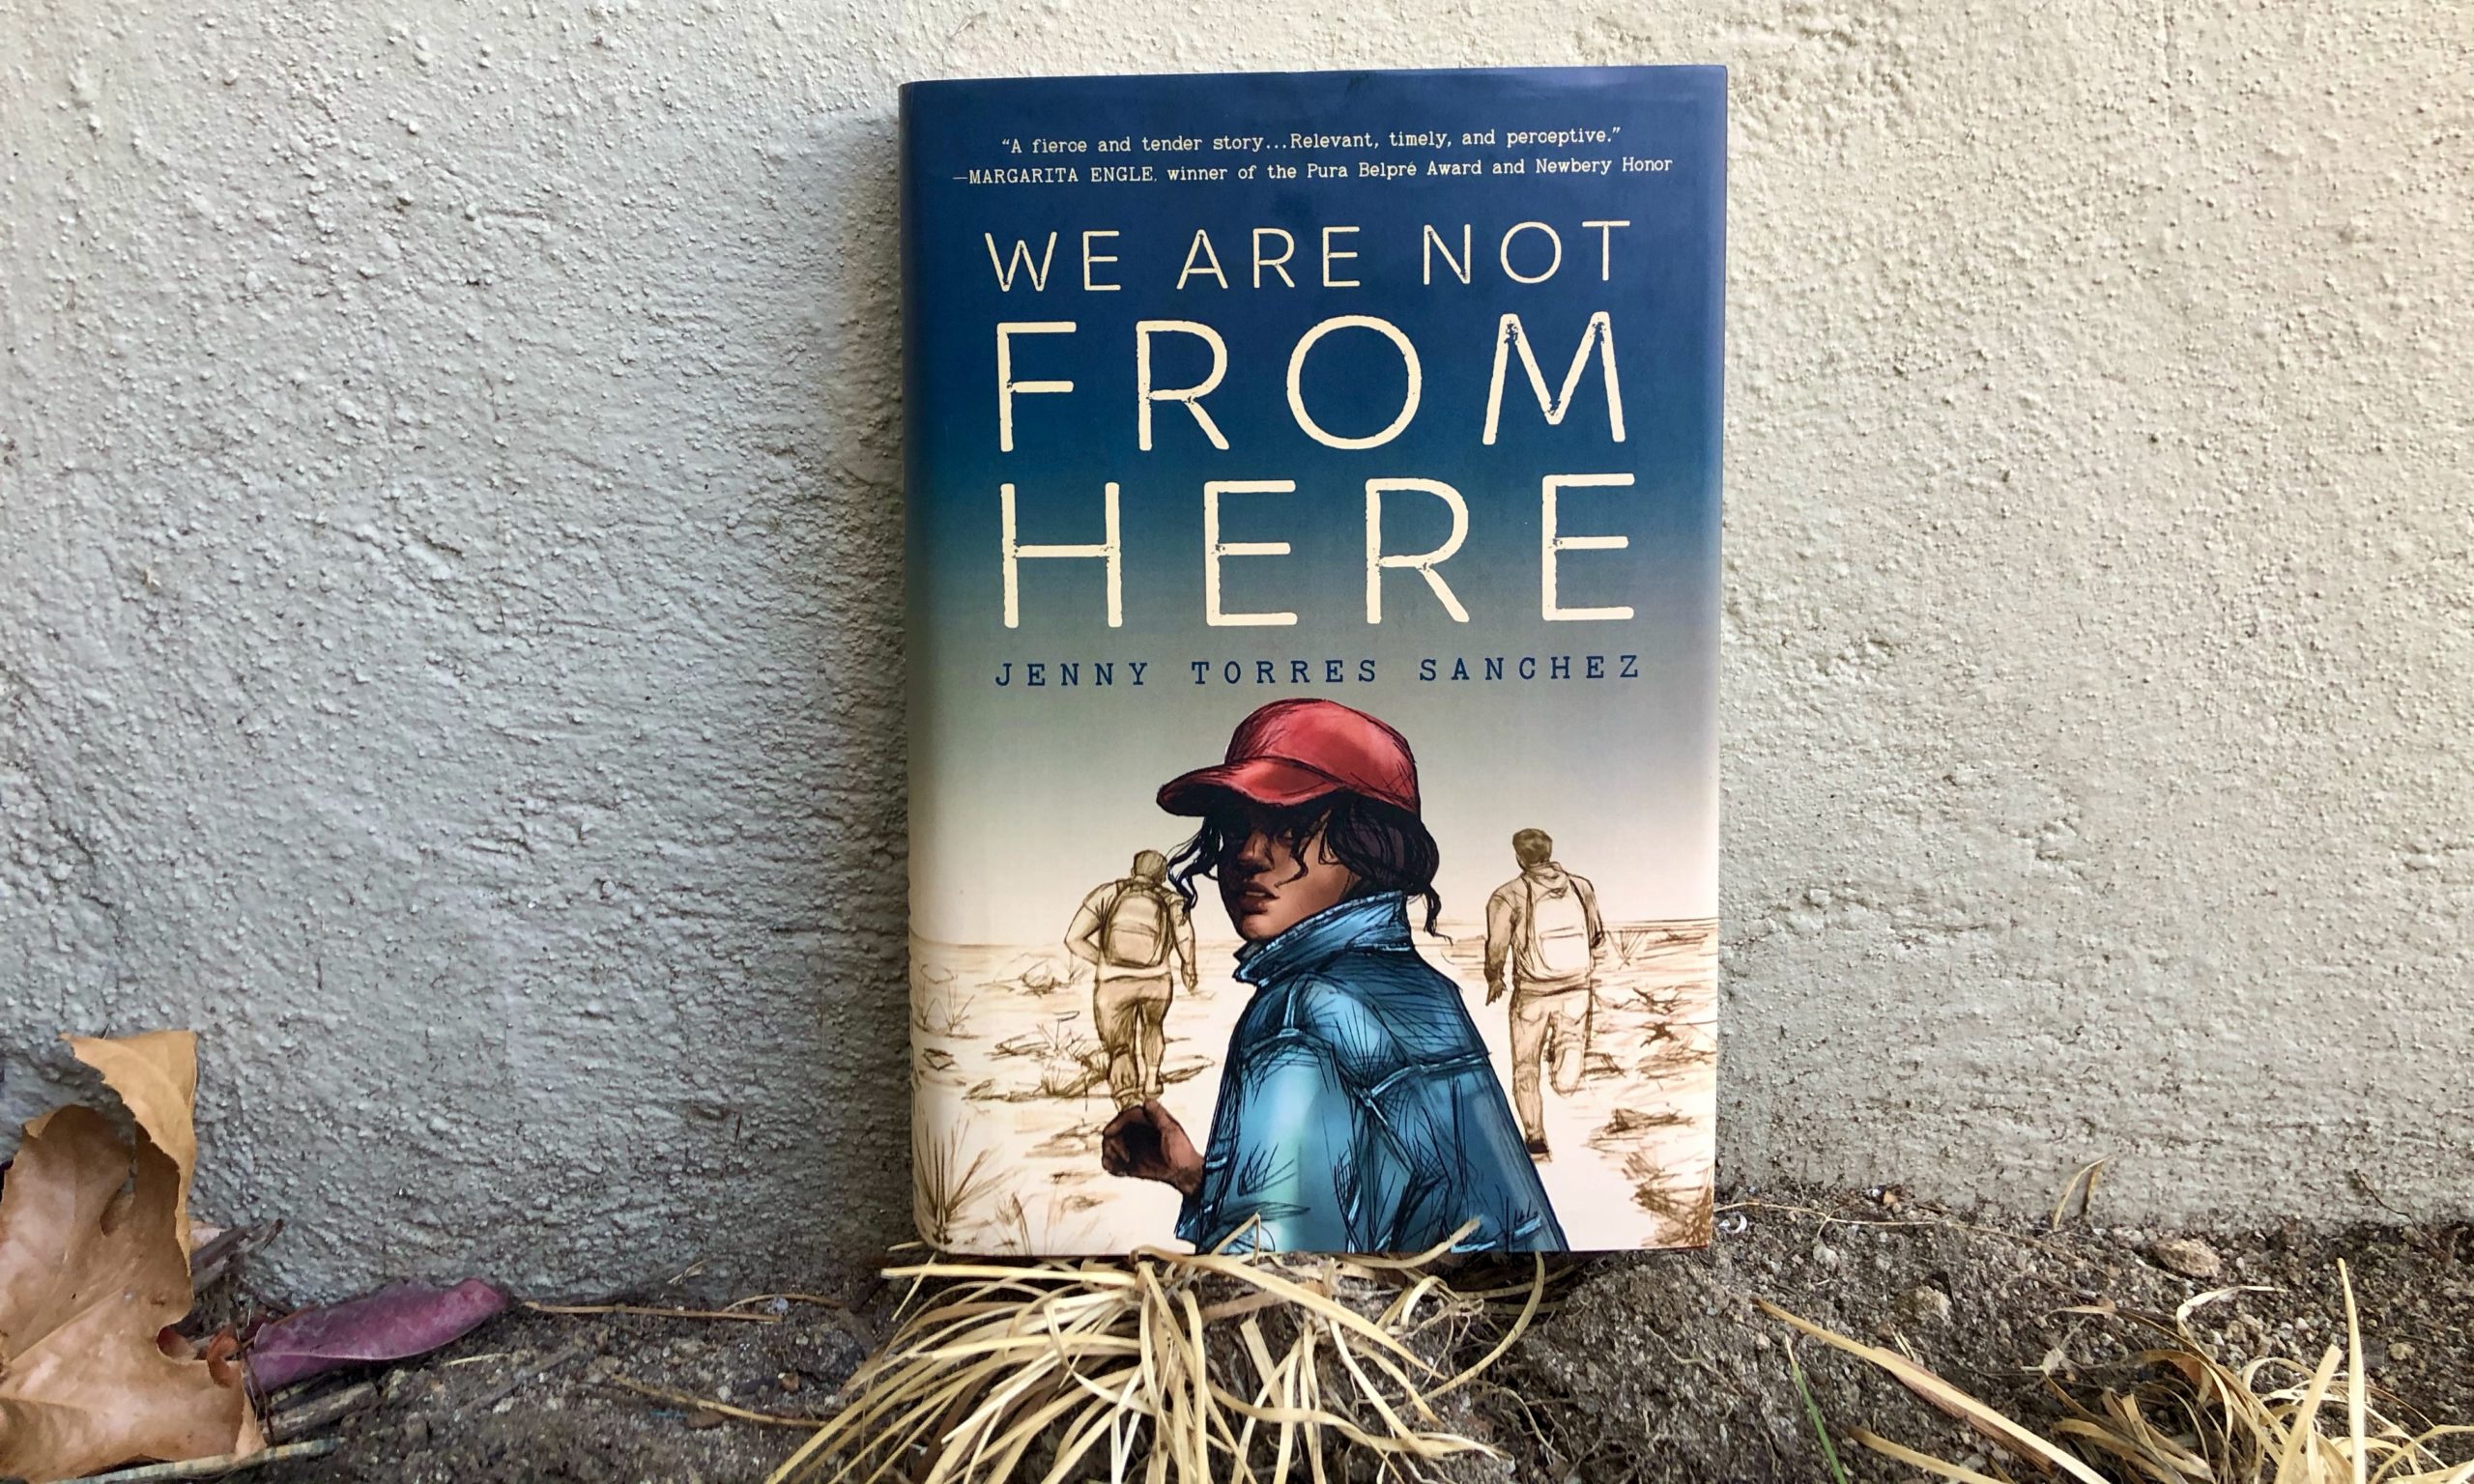 We Are Not From Here by Jenny Torres Sanchez